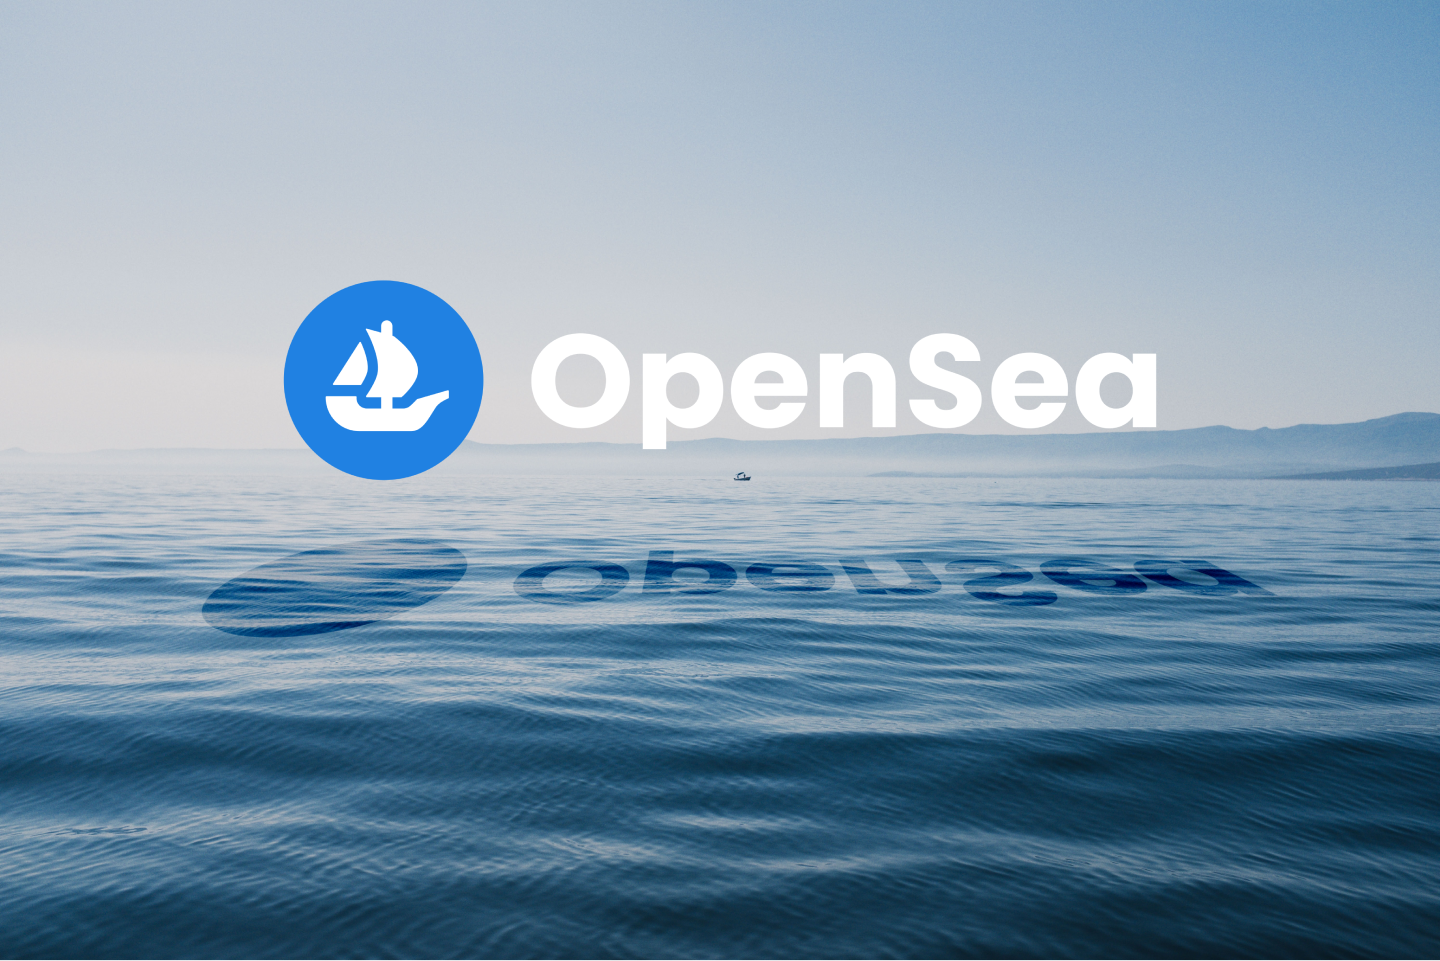 OpenSea Clone - Wise choice For Startups in NFT World